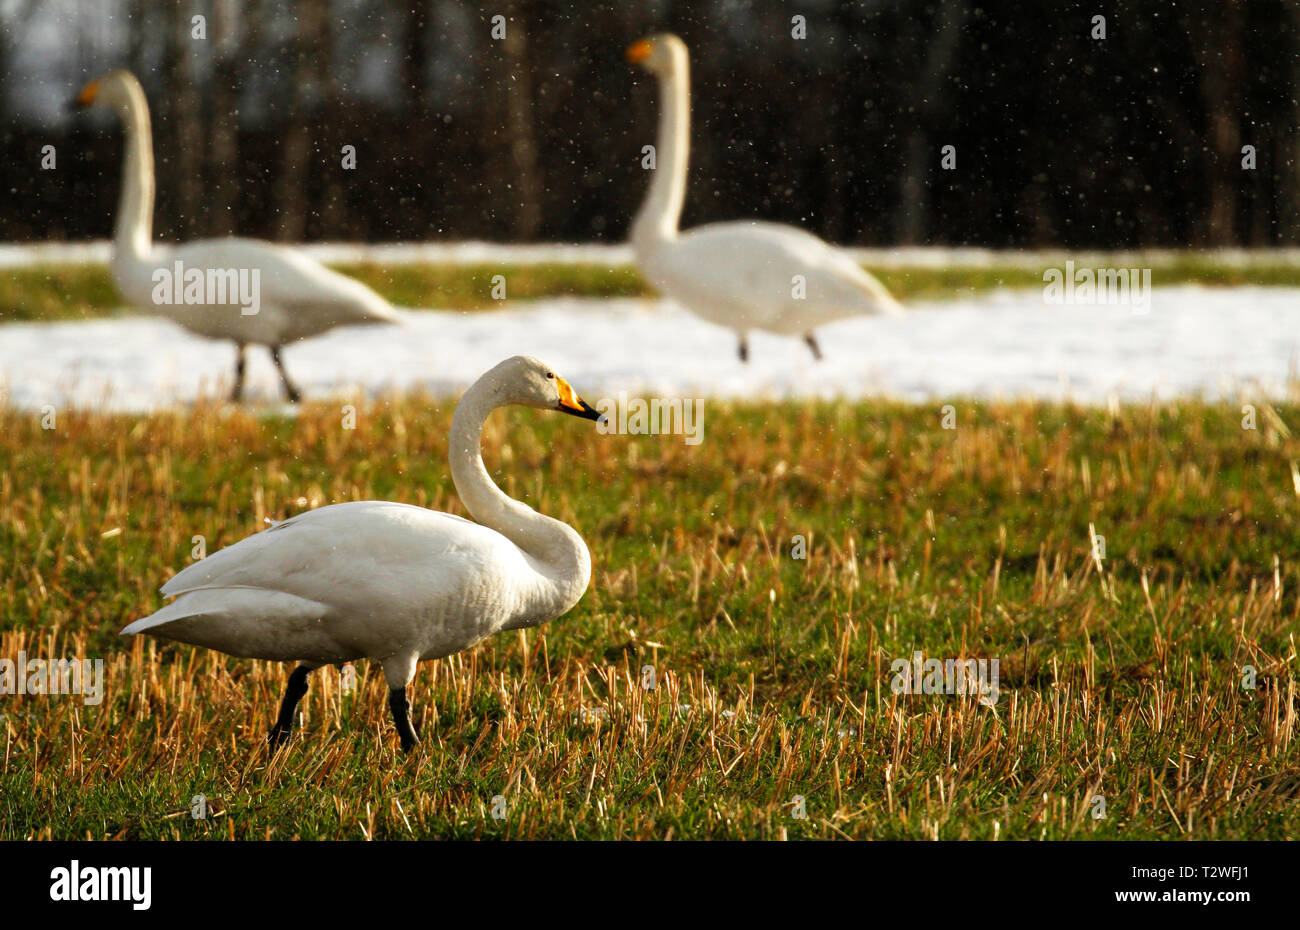 Whooper swans, Cygnus cygnus, grazing and resting on the field after spring migration in Finland. Stock Photo